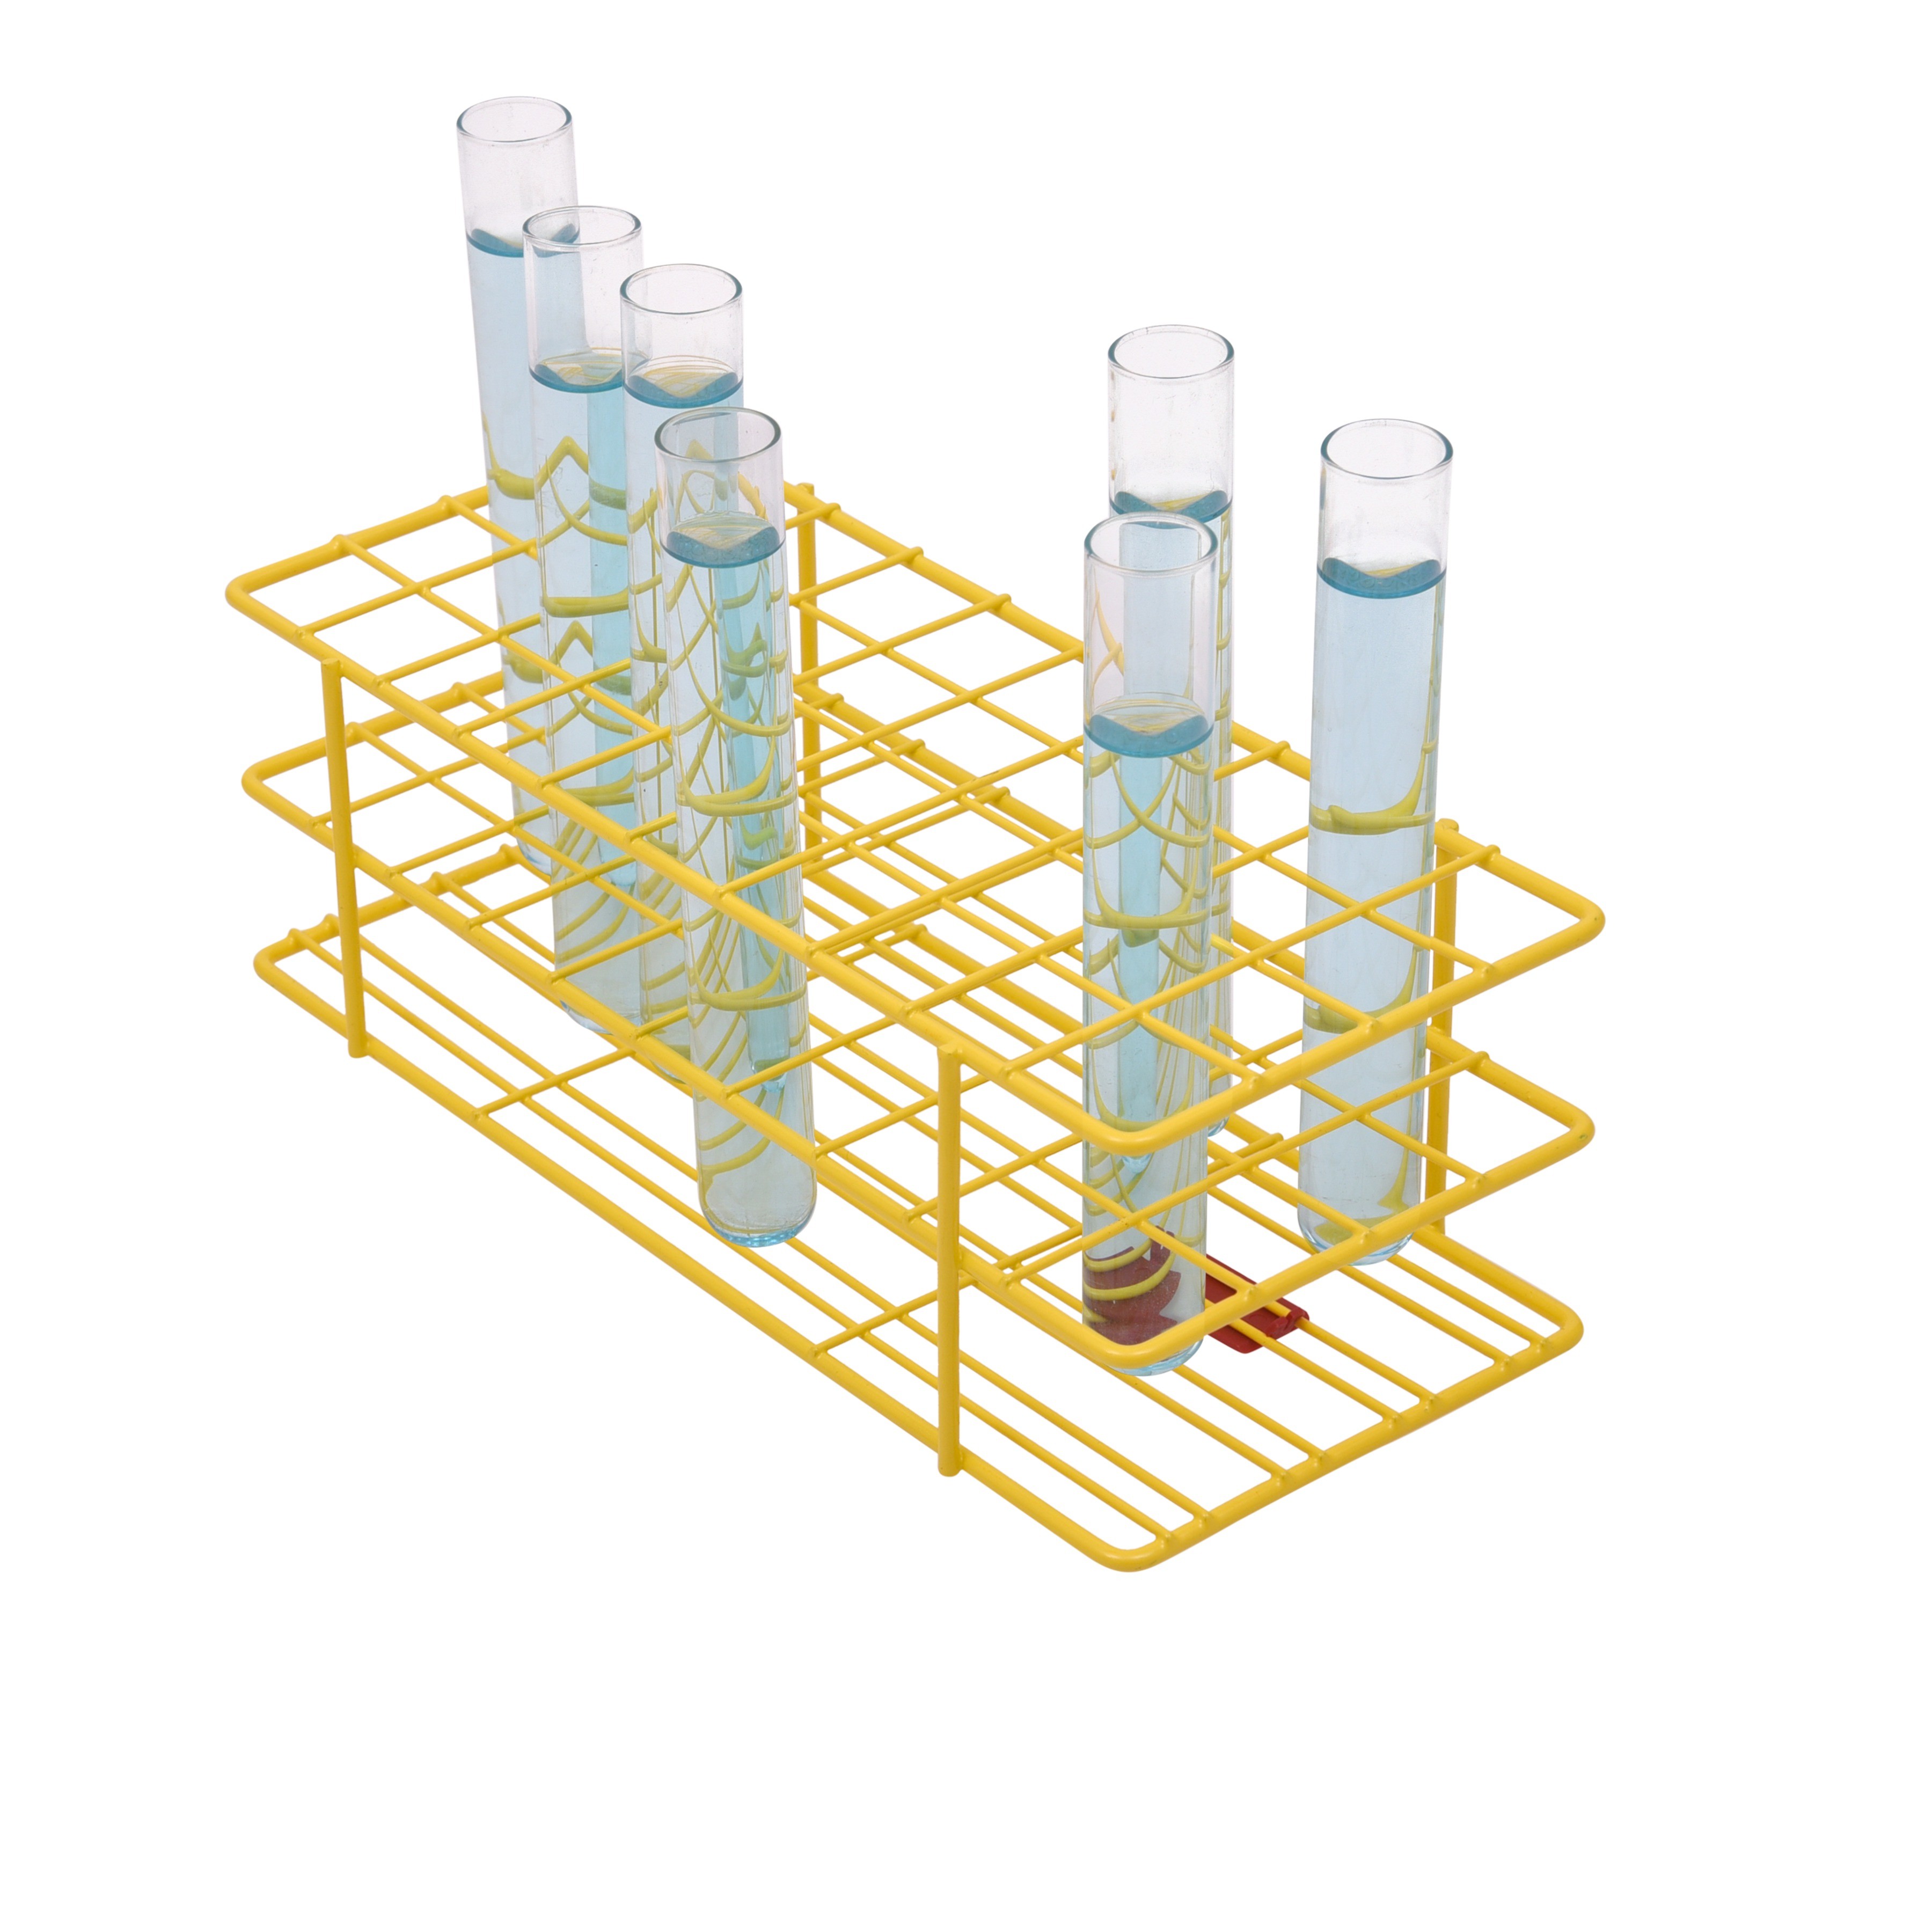 SP Bel-Art Poxygrid Test Tube Rack; For 16-20mm Tubes, 40 Places, Yellow